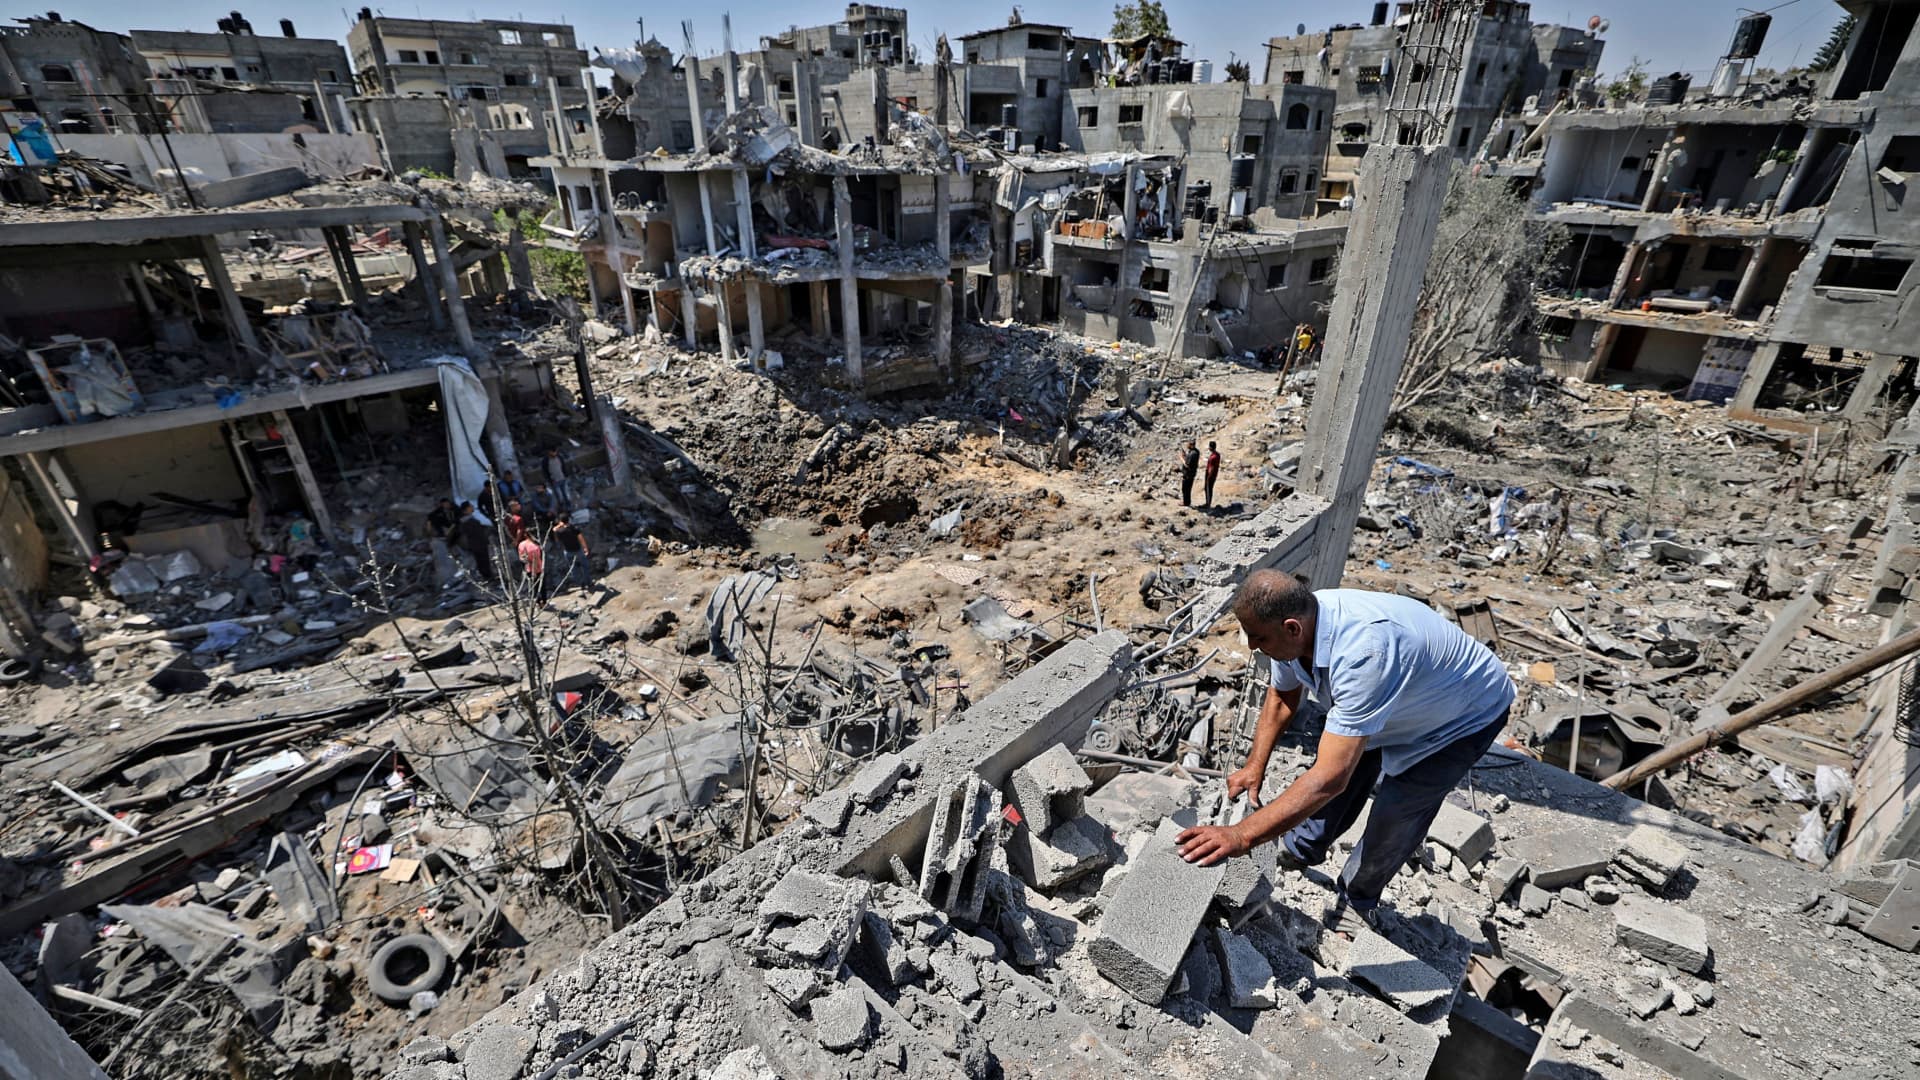 Palestinians assess the damage caused by Israeli airstrikes, in Beit Hanun in the northern Gaza Strip, on May 14, 2021.